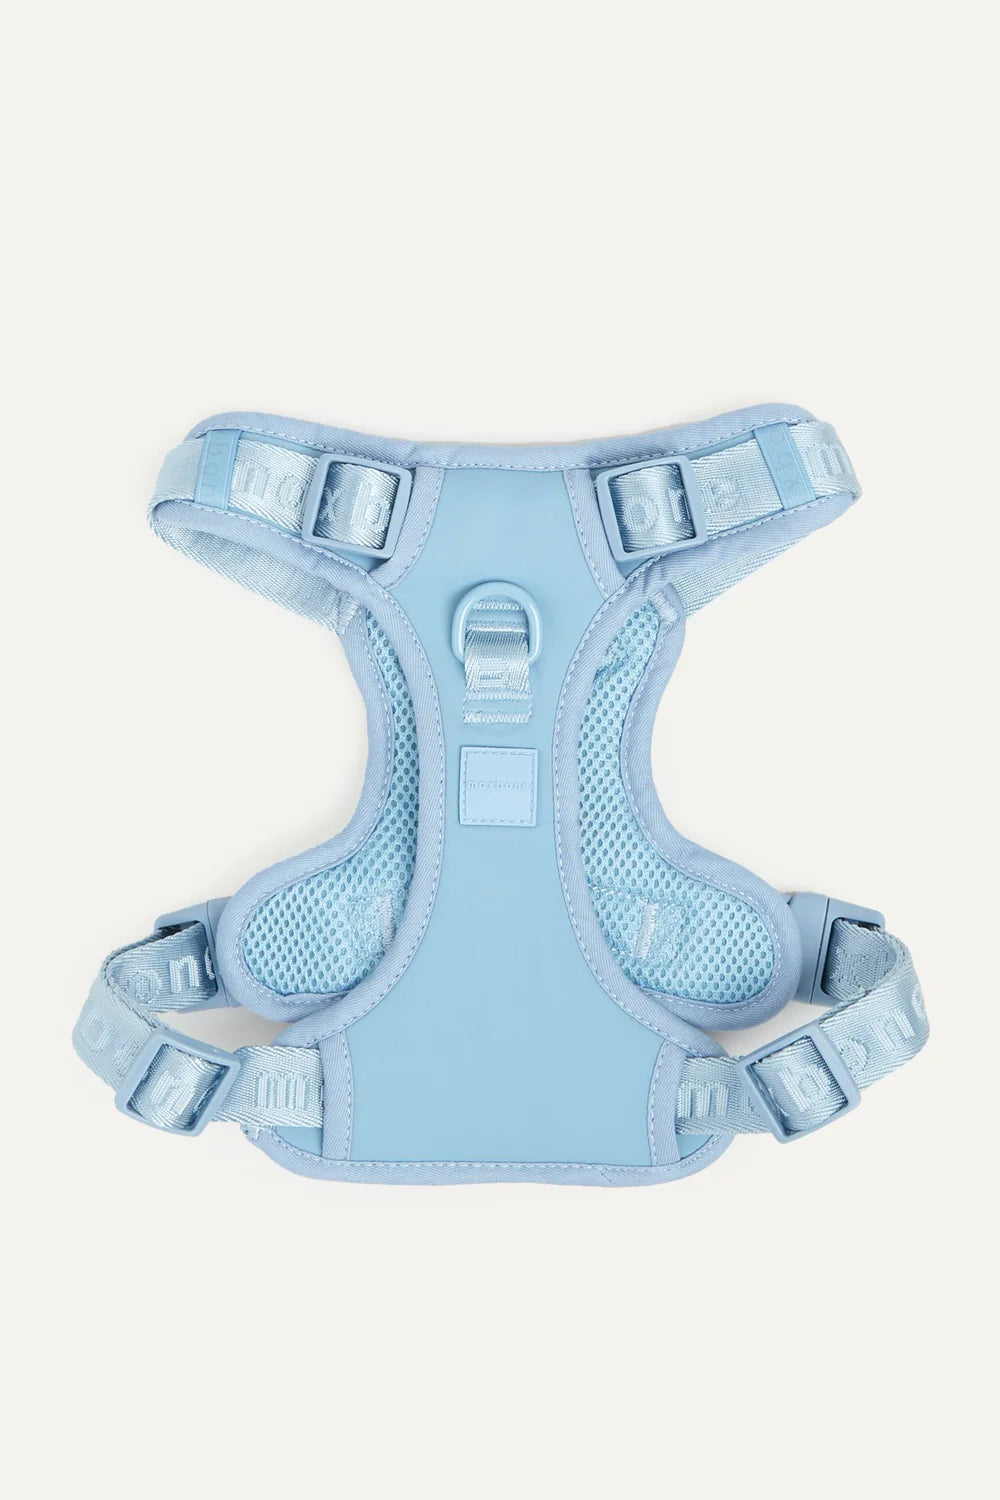 Easy Fit Dog Harness in Blue